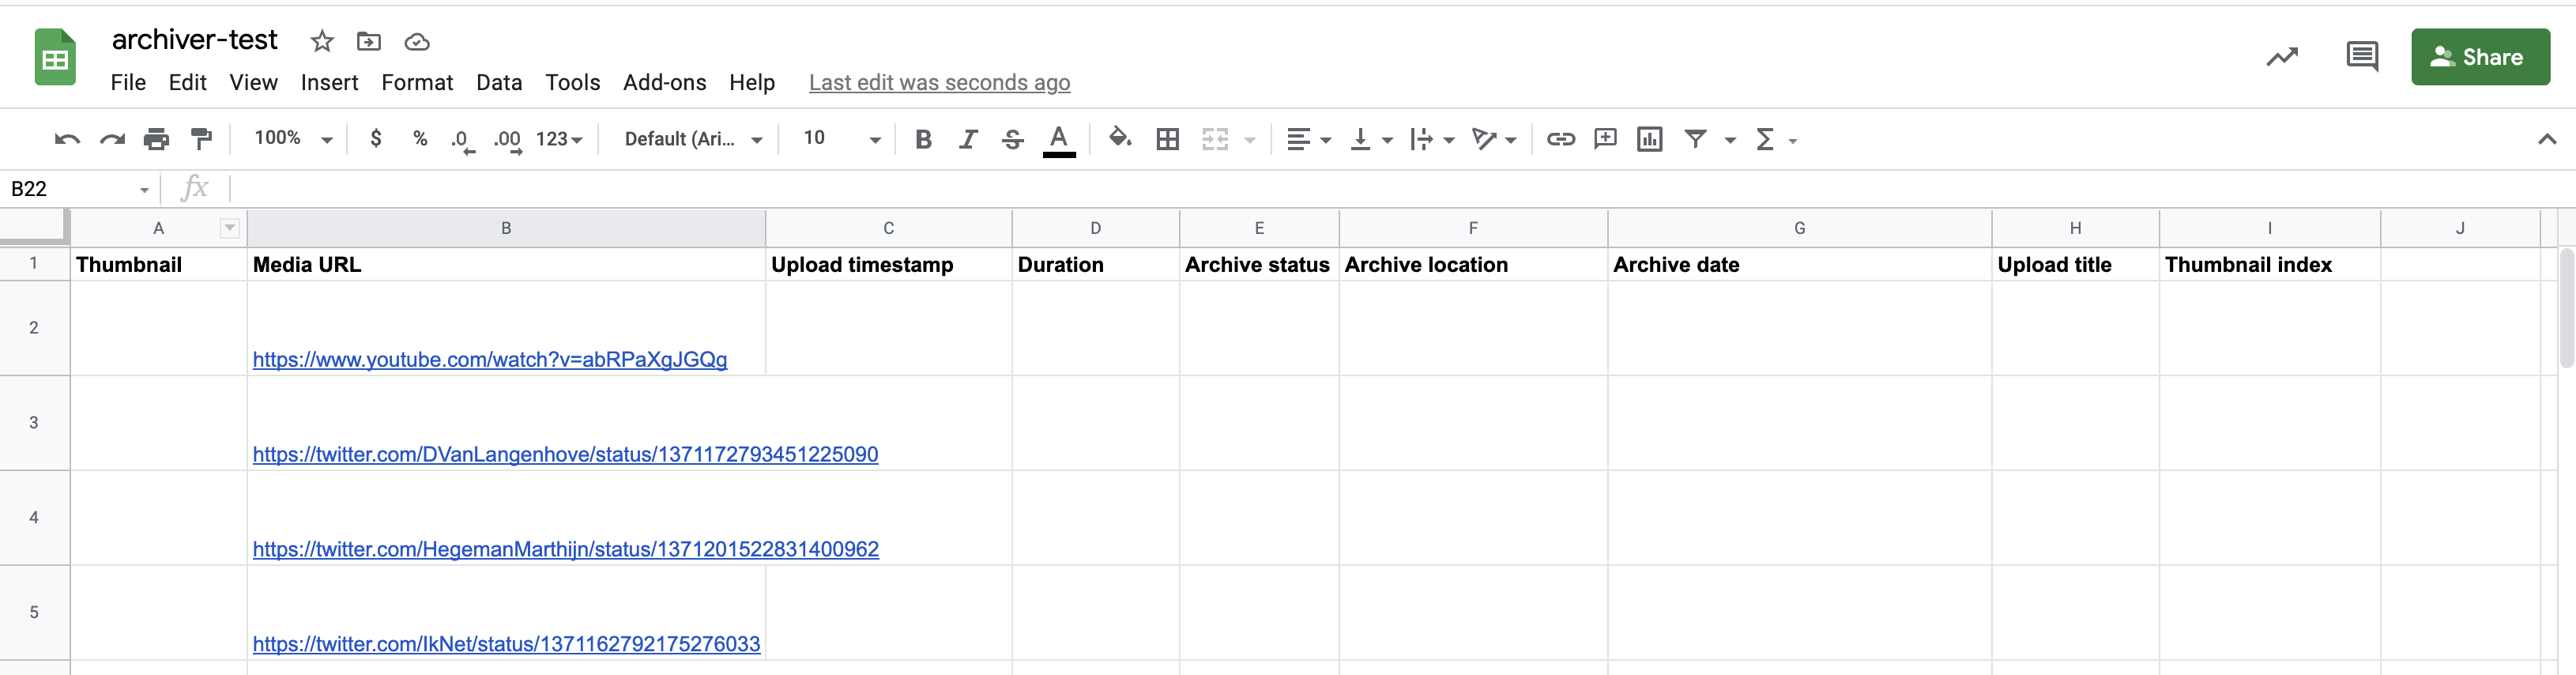 A screenshot of a Google Spreadsheet with column headers defined as above, and several Youtube and Twitter URLs in the "Media URL" column